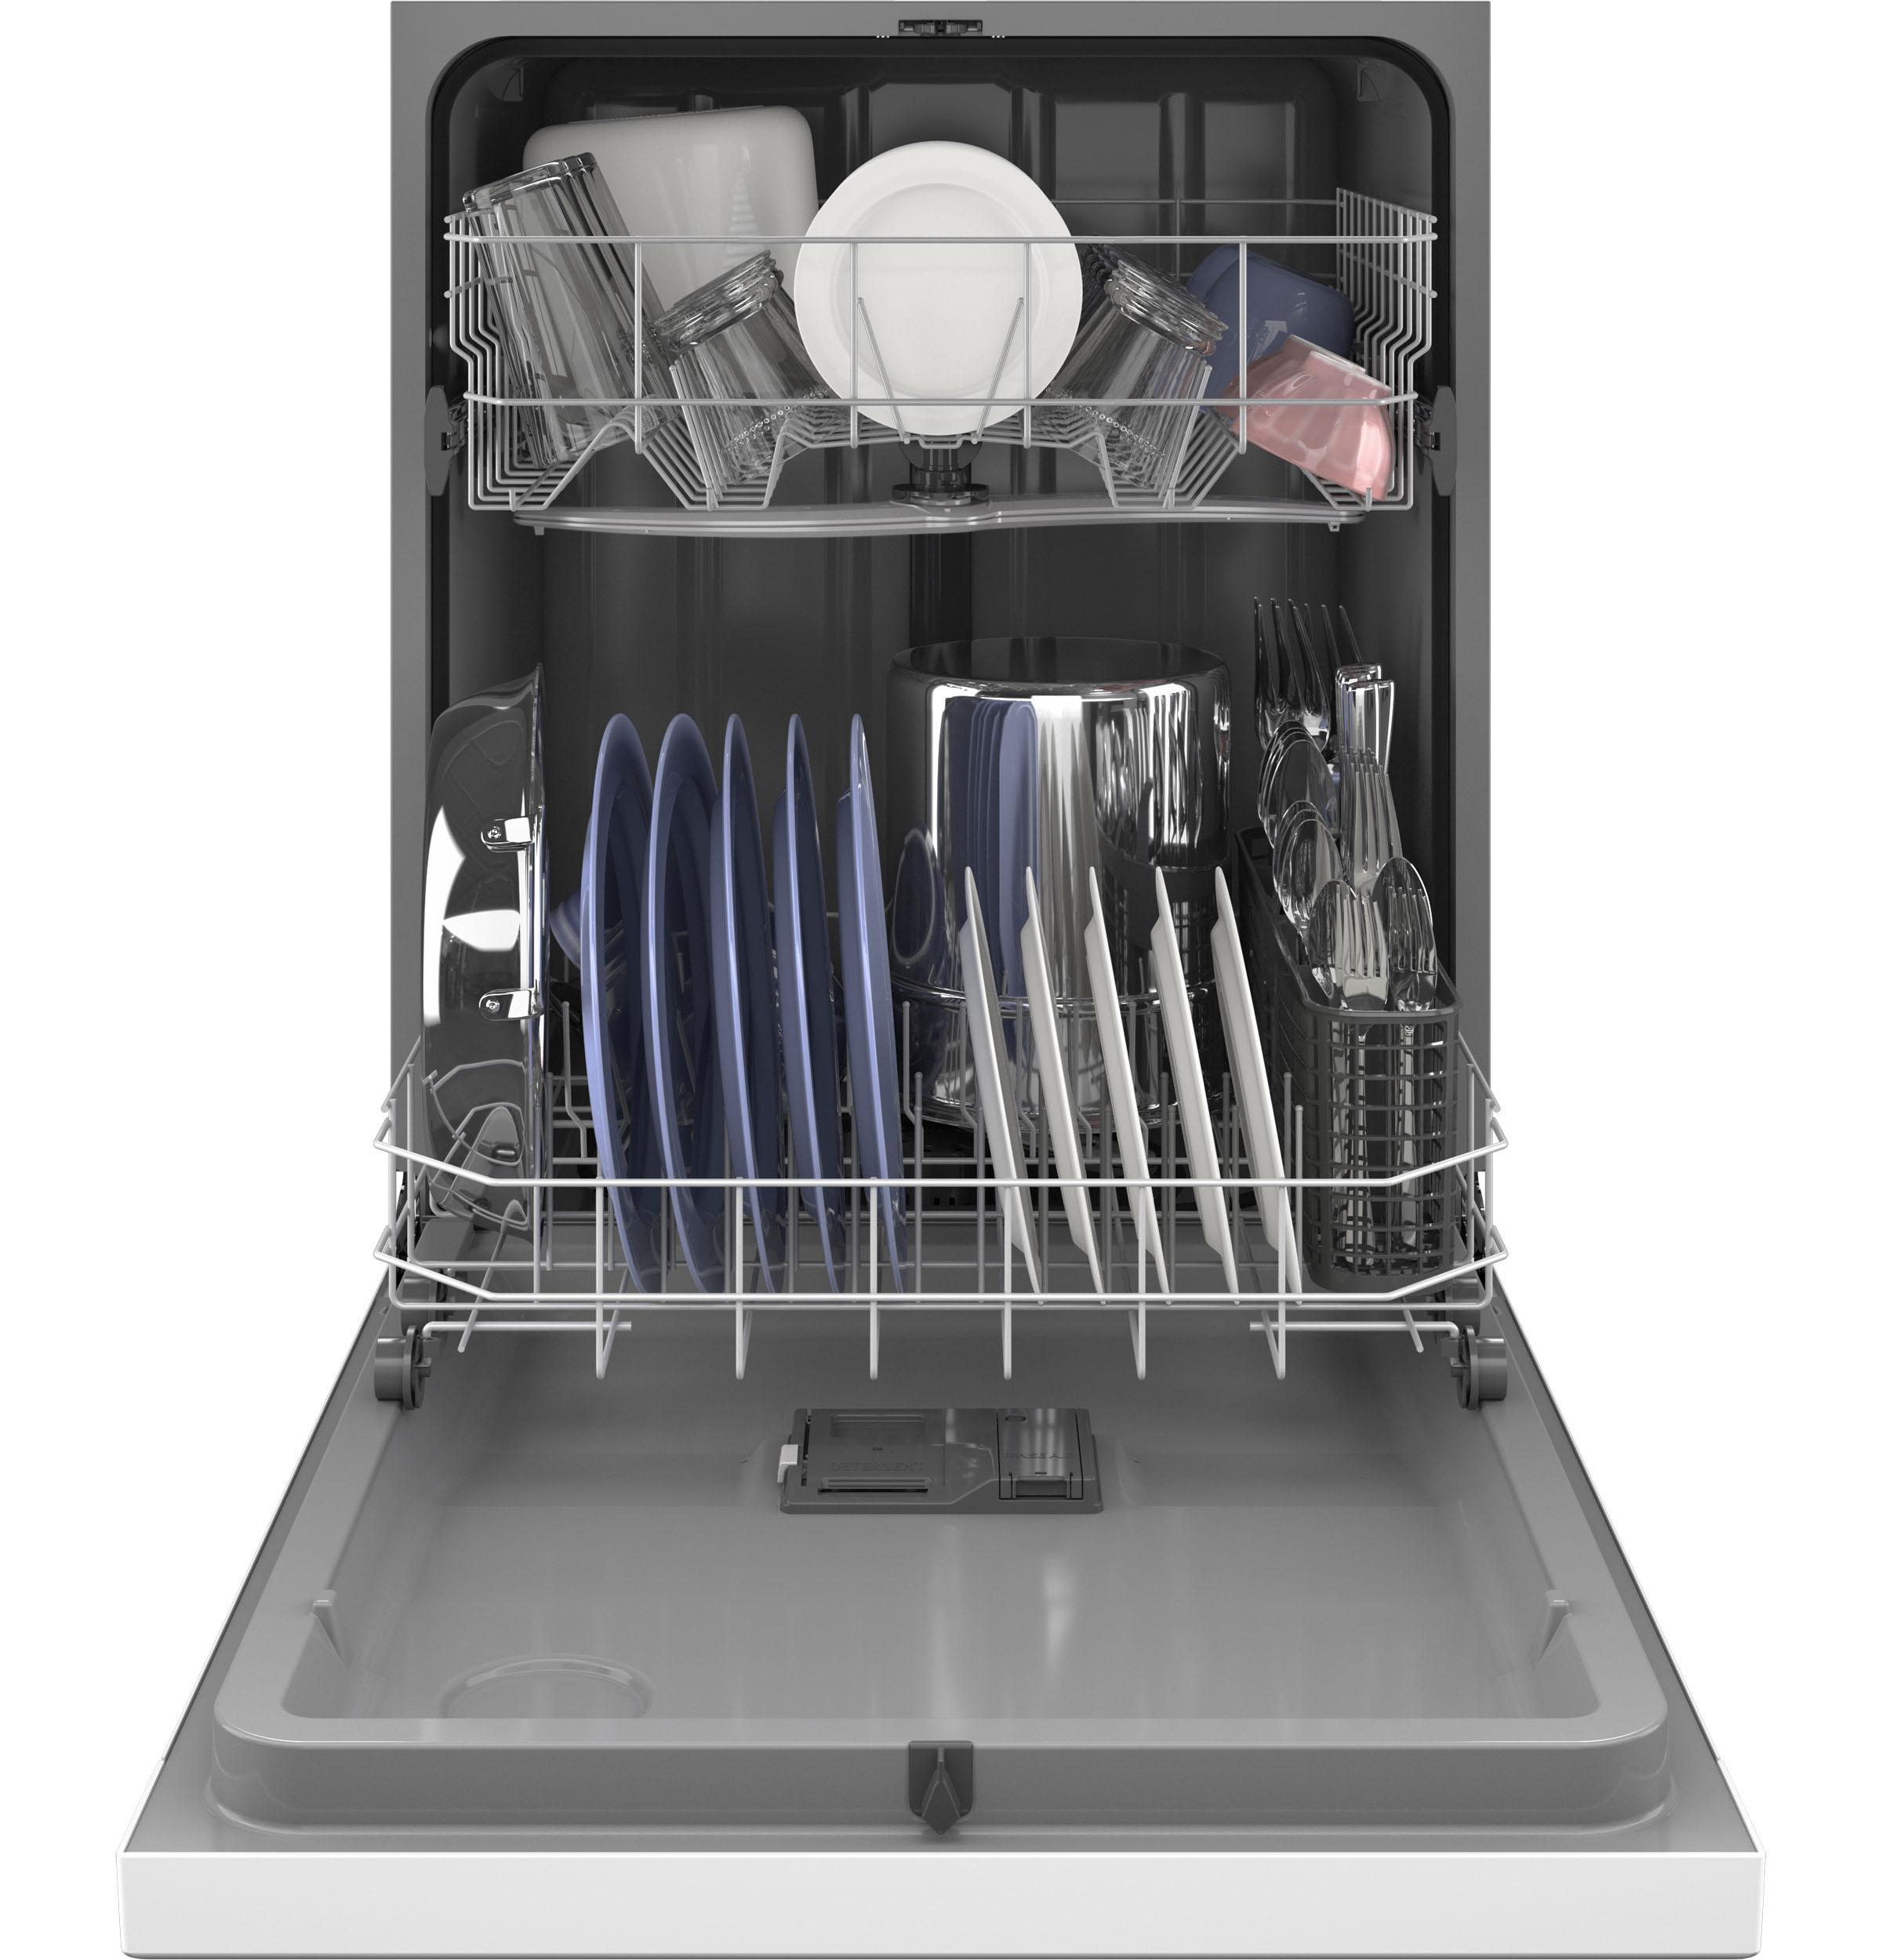 GE® ENERGY STAR® Dishwasher with Front Controls with Power Cord